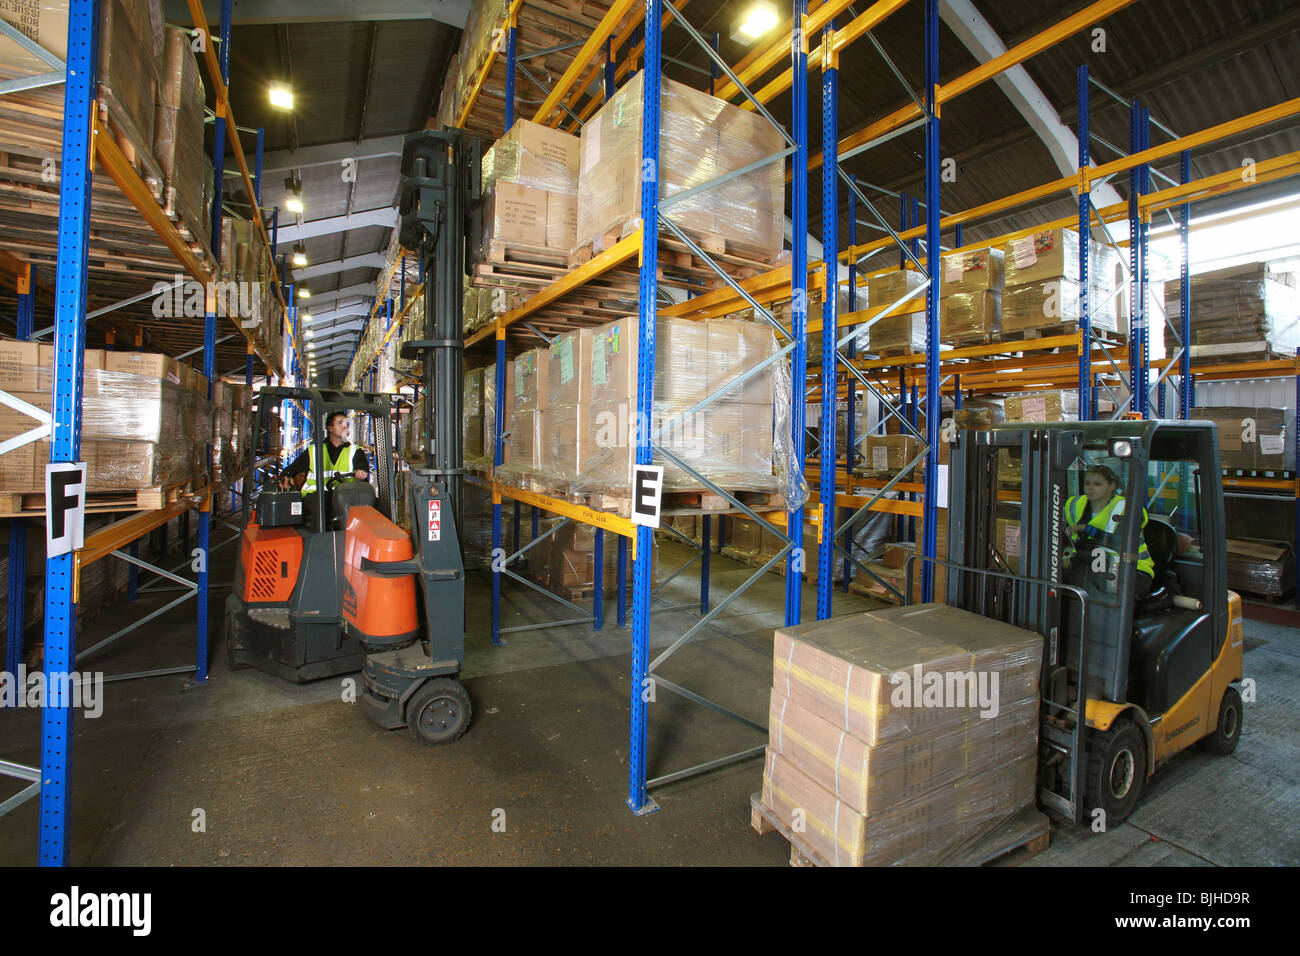 Forklift truck operating in warehouse Stock Photo